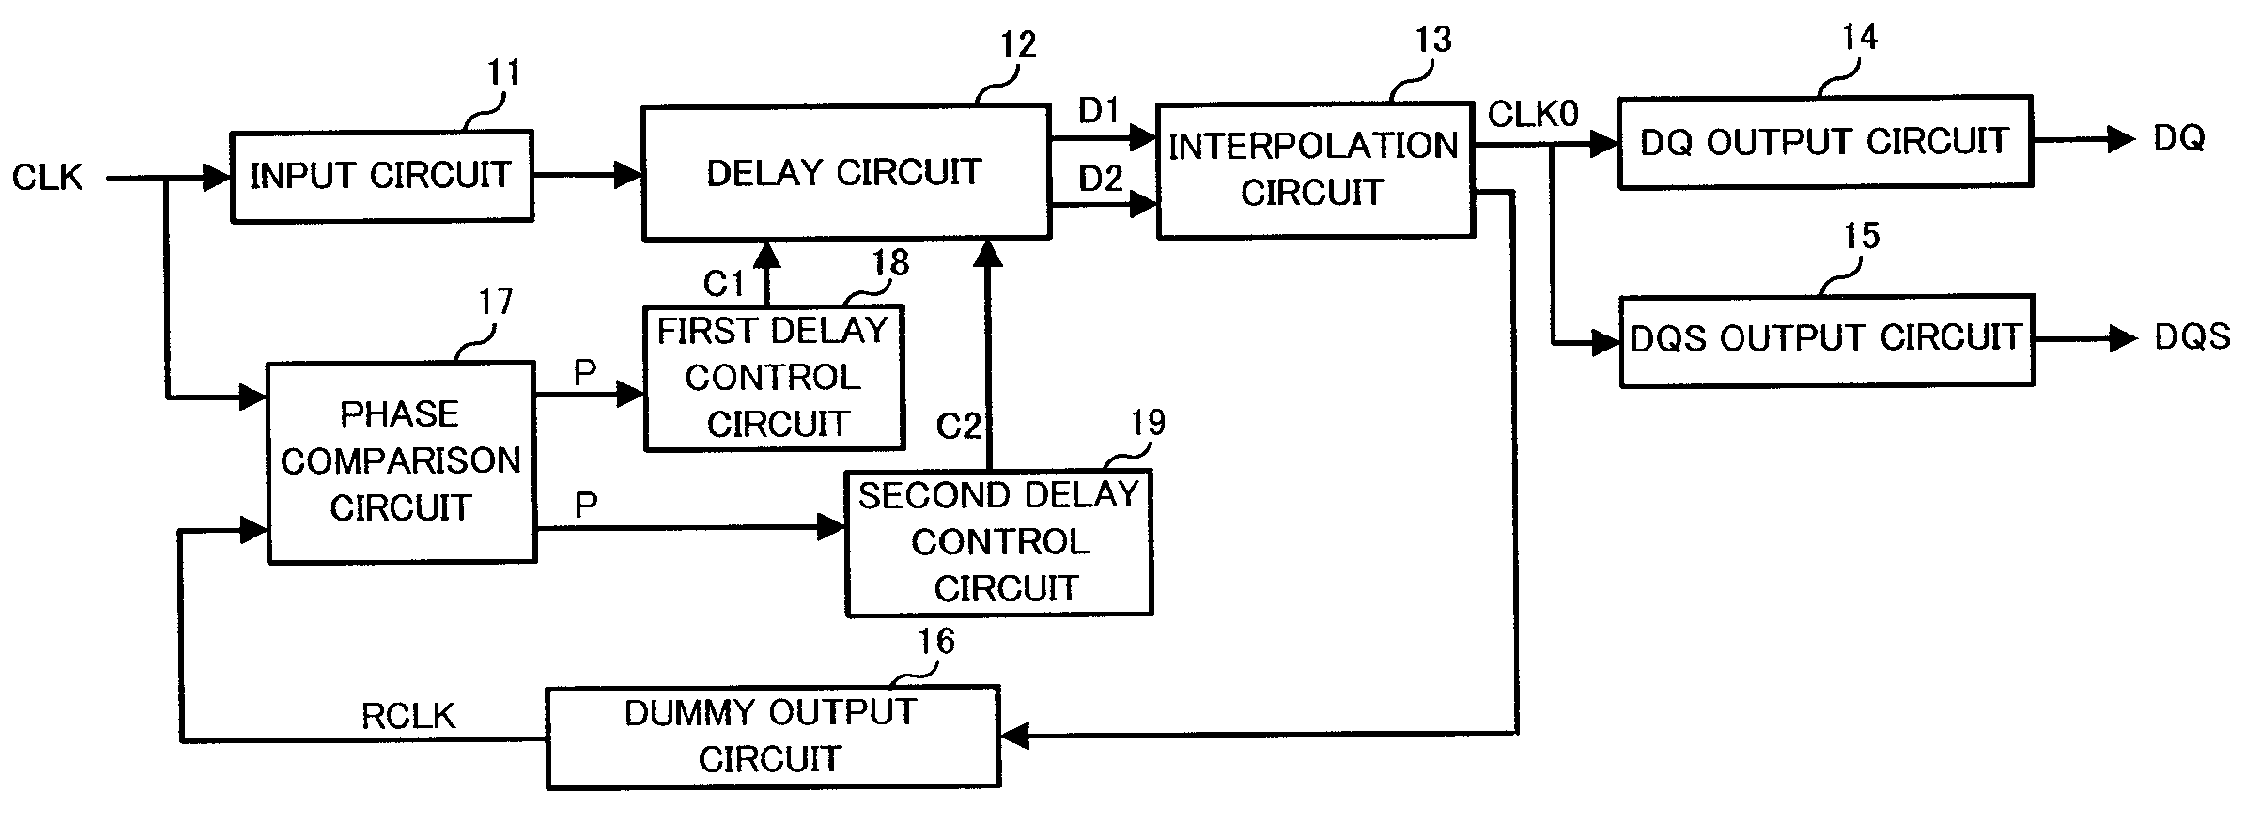 Dll circuit and semiconductor device having the same